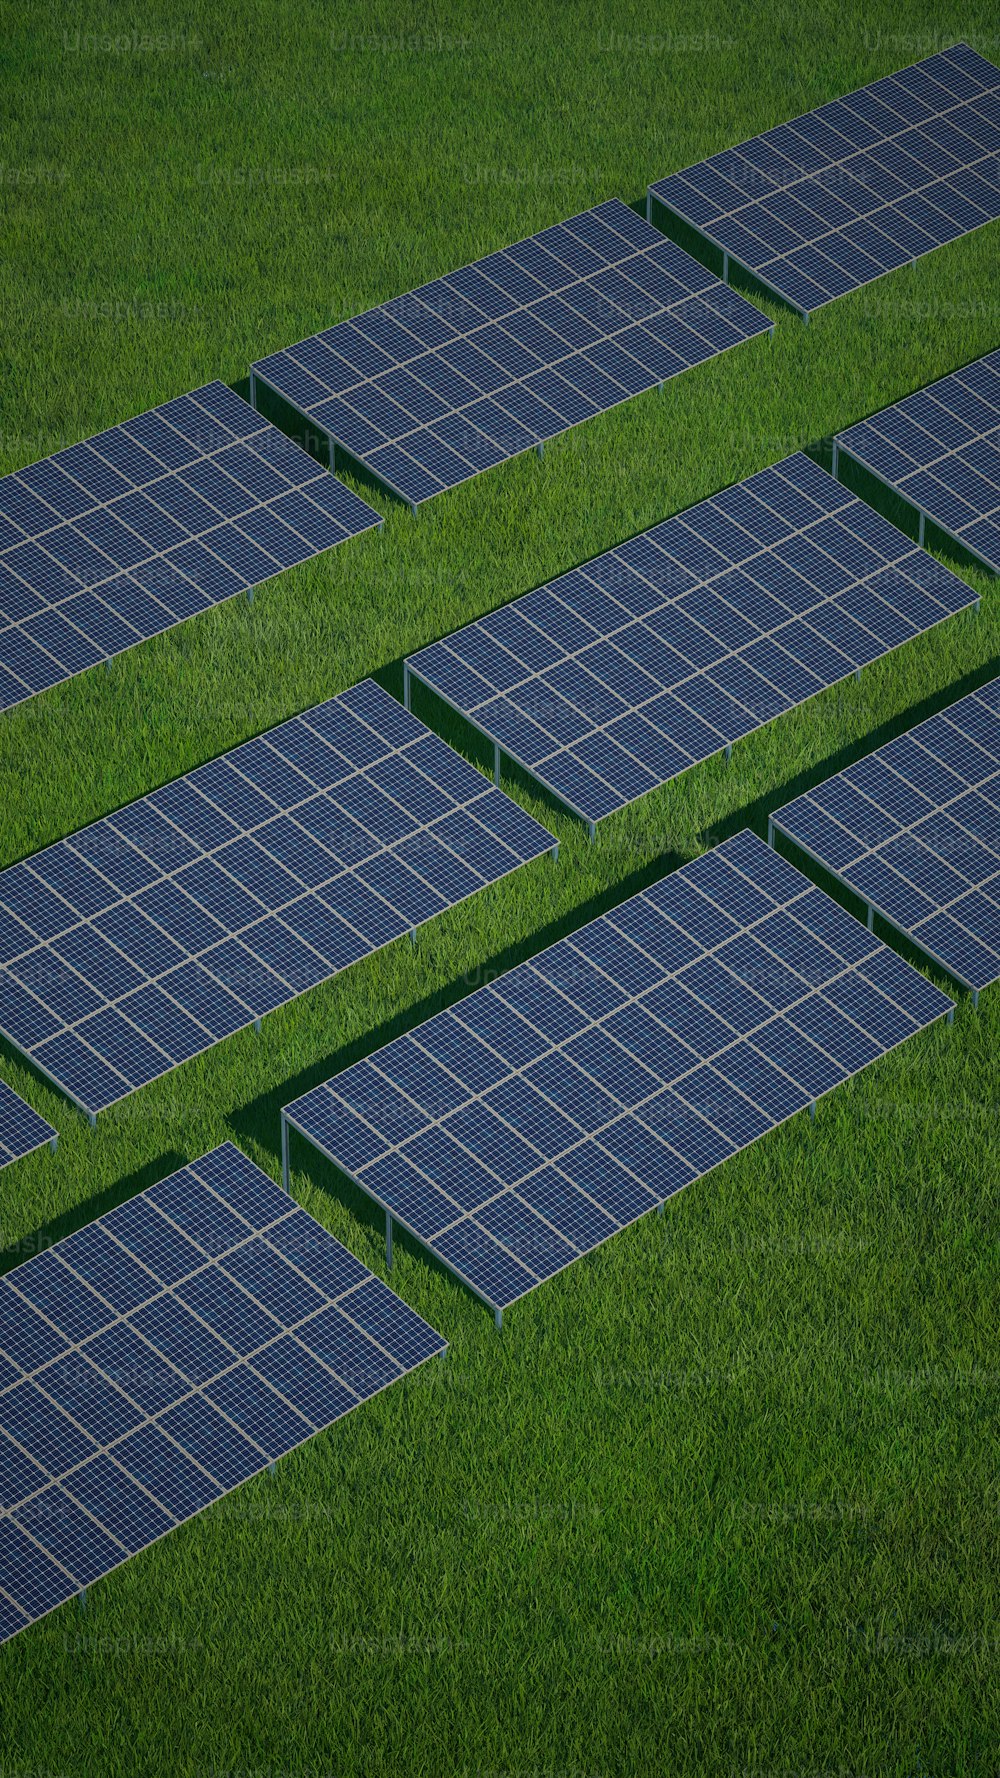 several rows of solar panels in a field